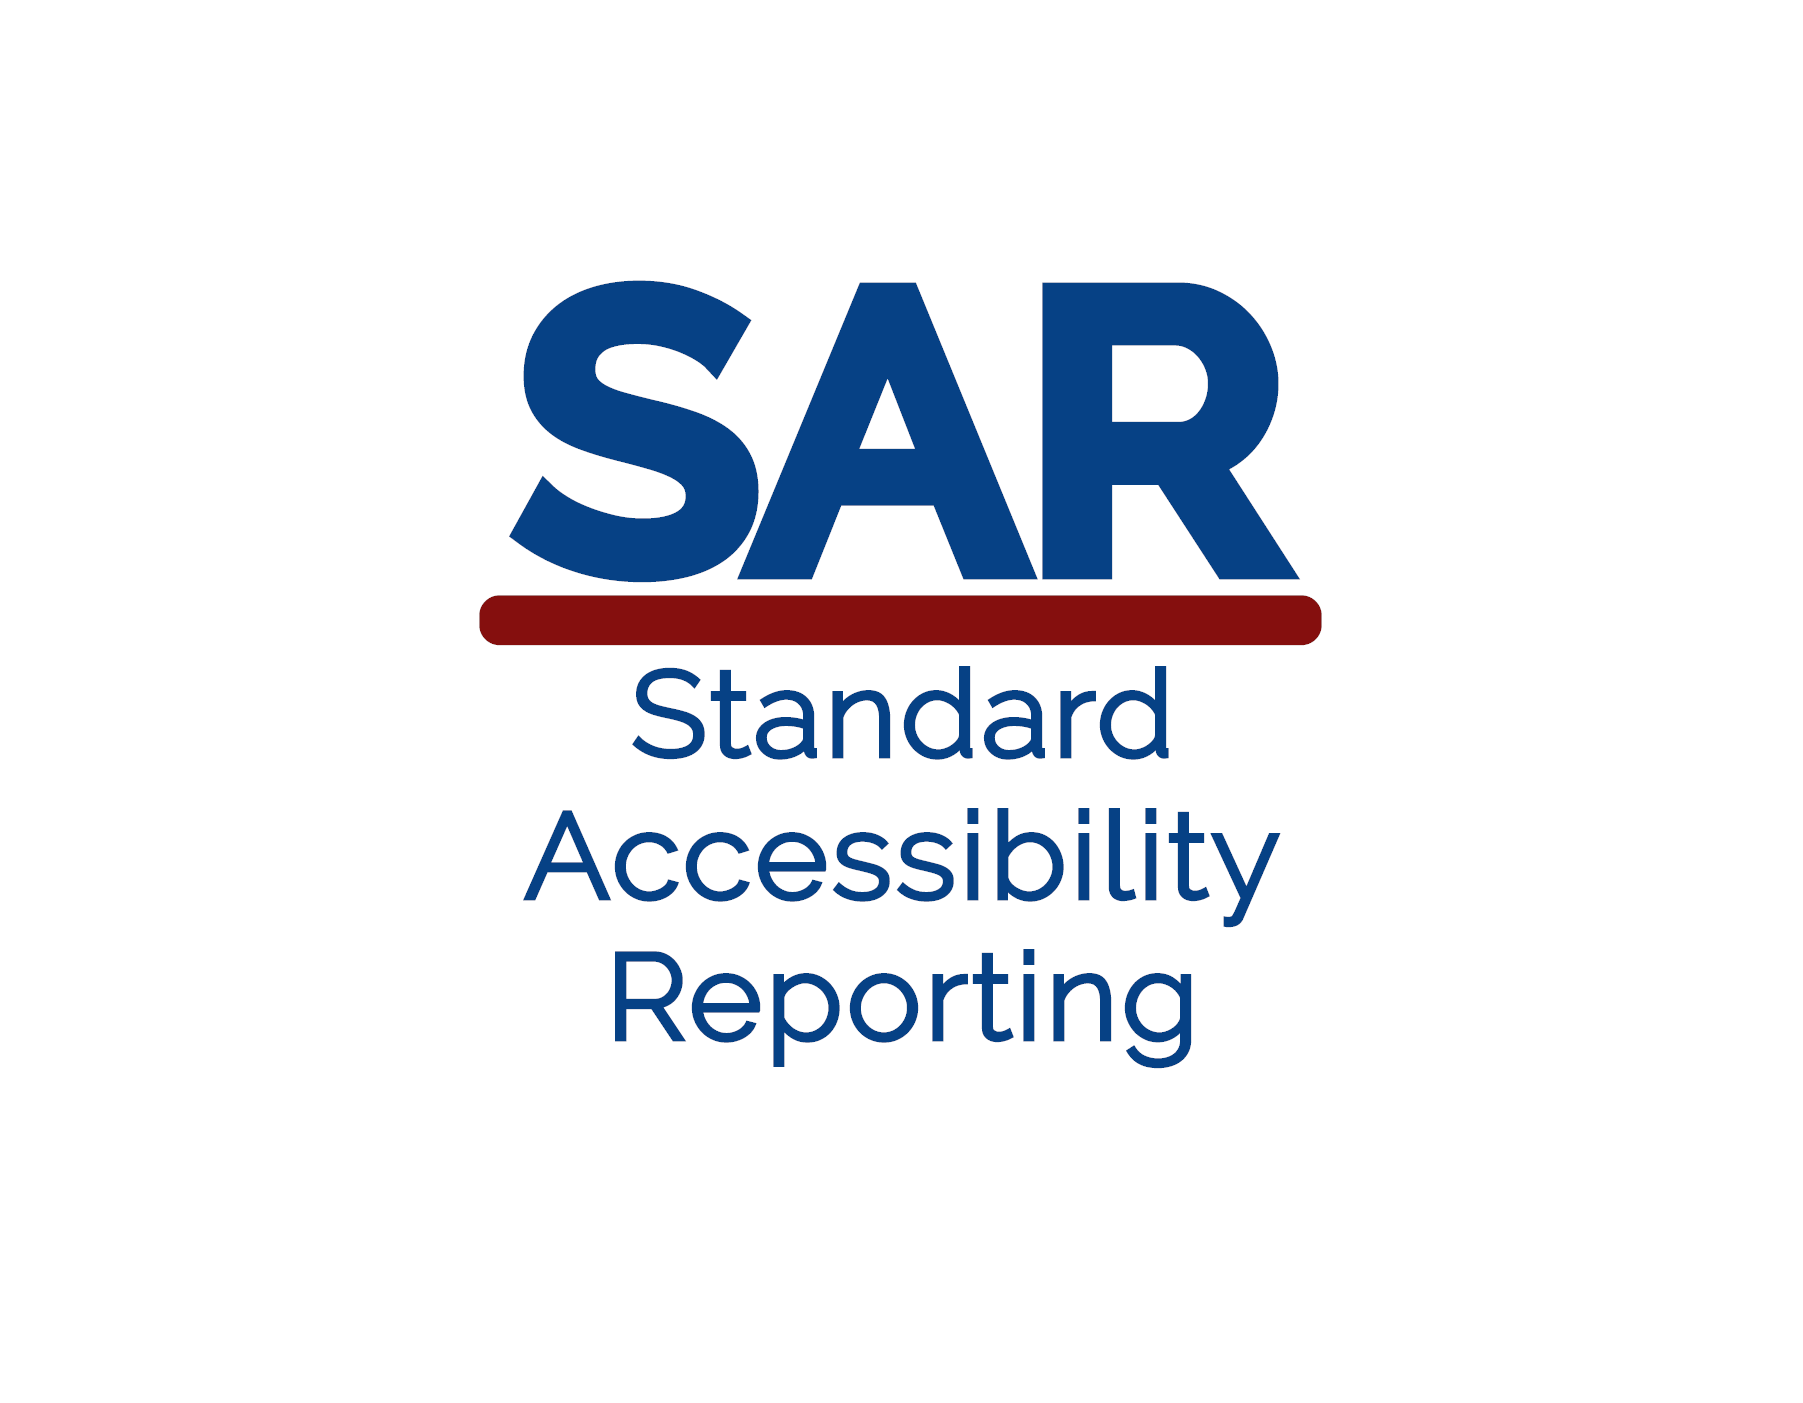 Standard Accessibility Reporting logo